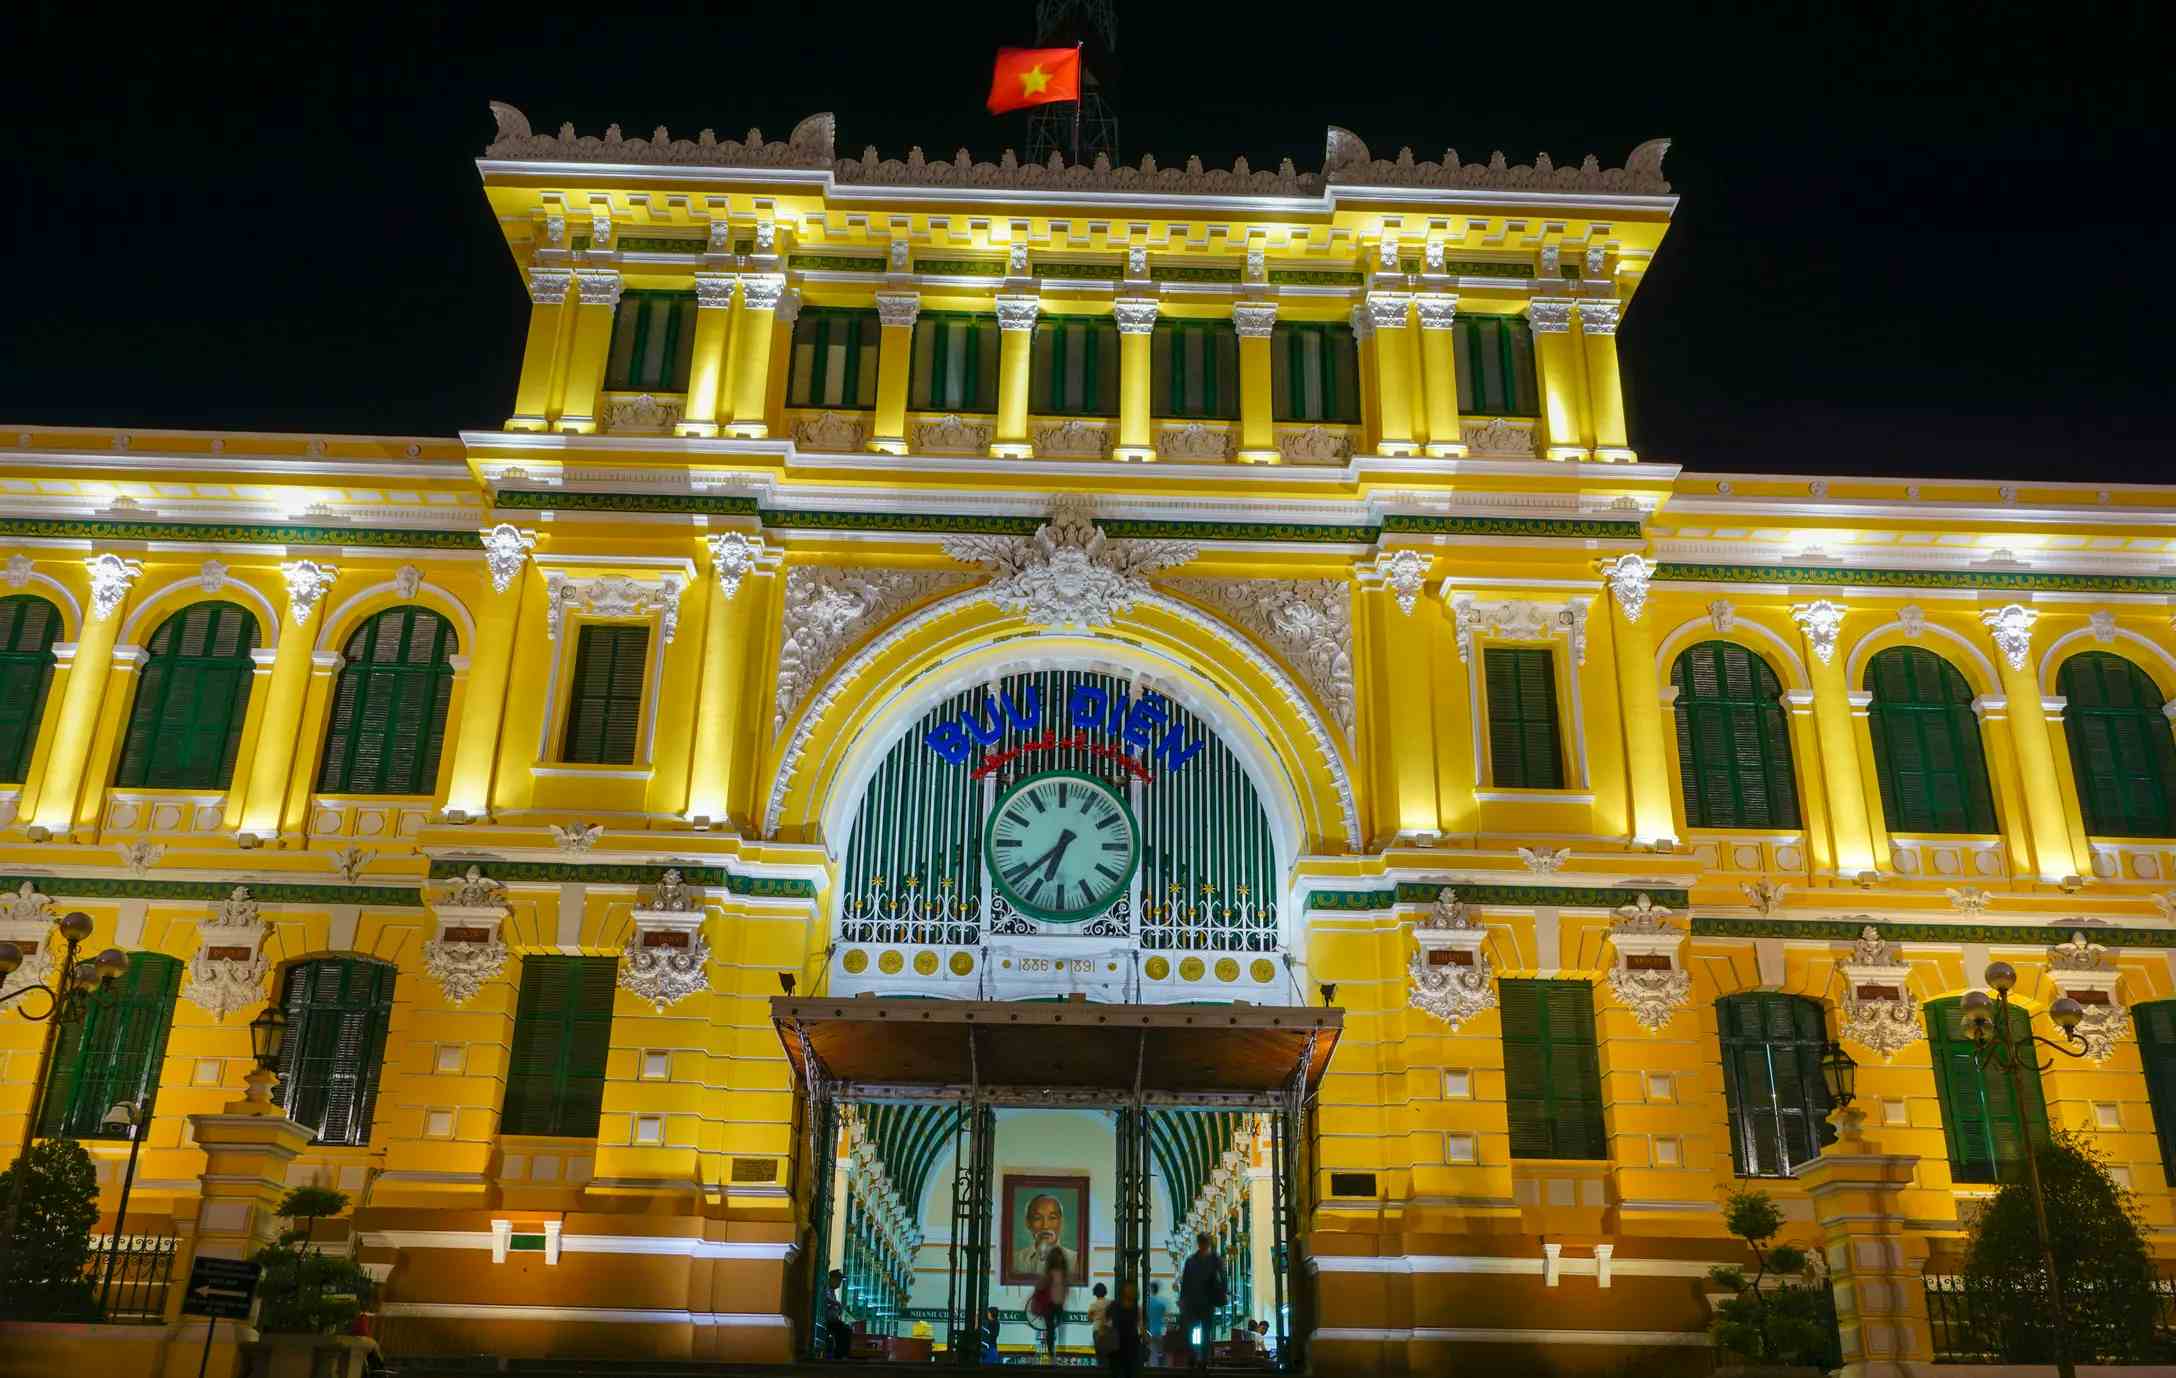 Sai Gon Central Post Office image